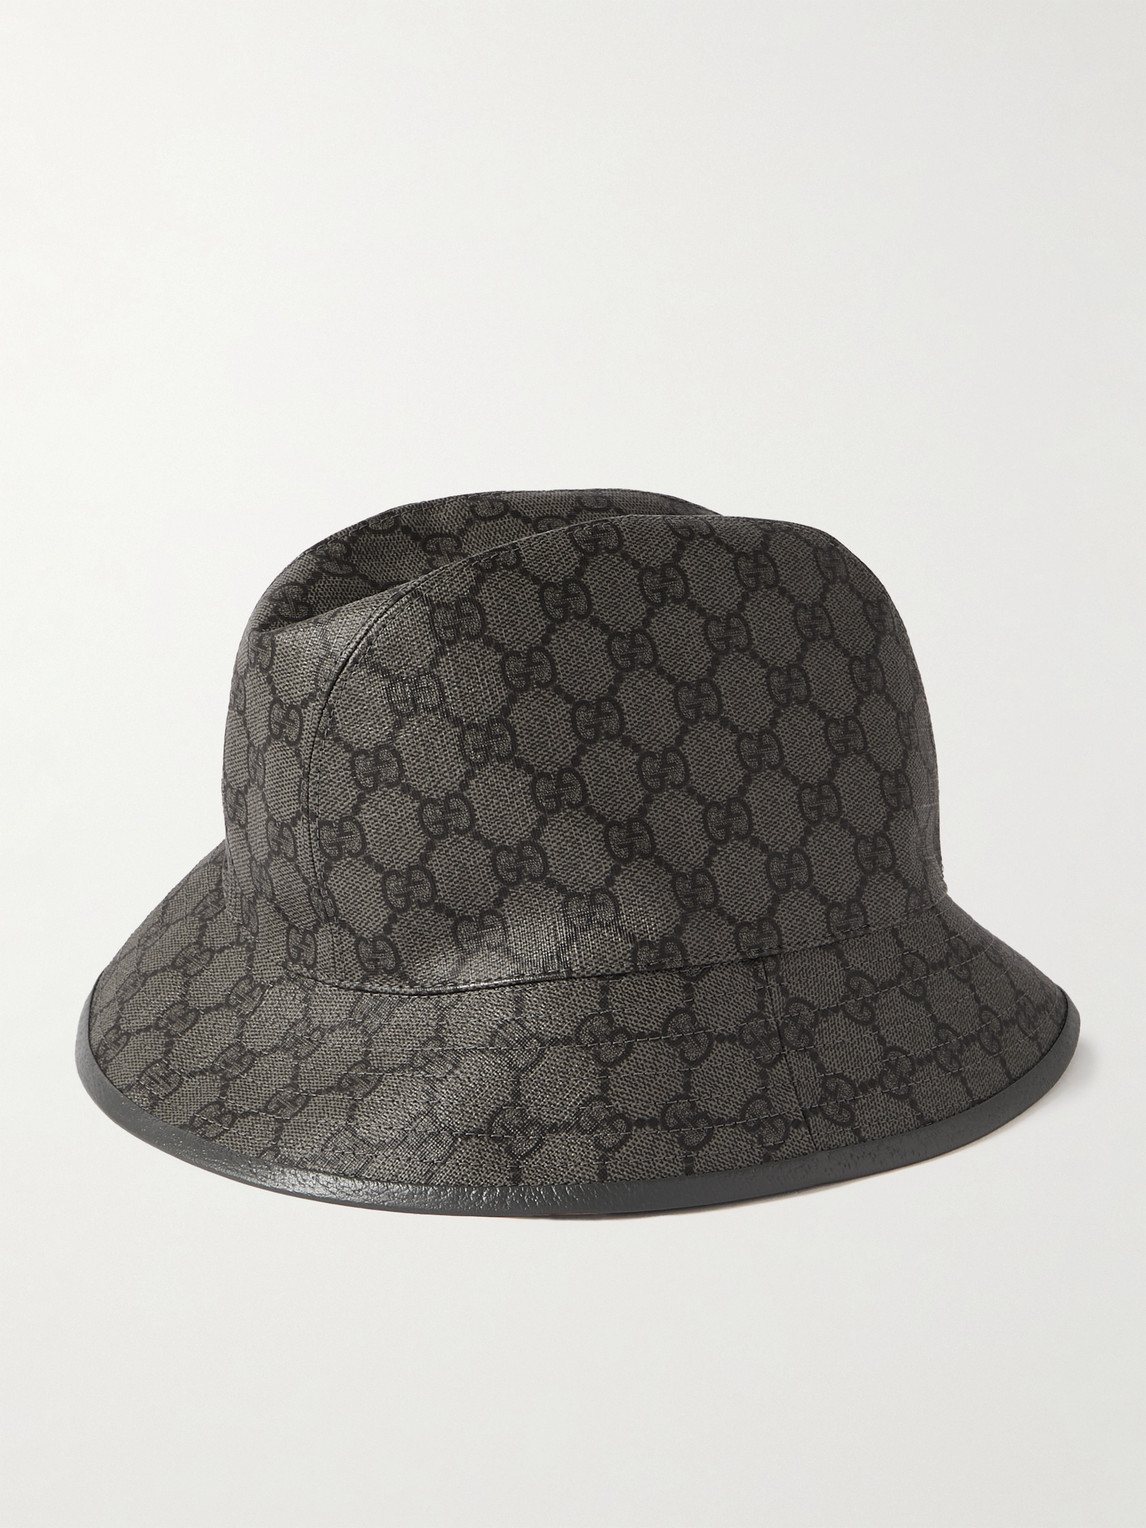 GUCCI LEATHER-TRIMMED MONOGRAMMED COATED COTTON-BLEND CANVAS FEDORA 